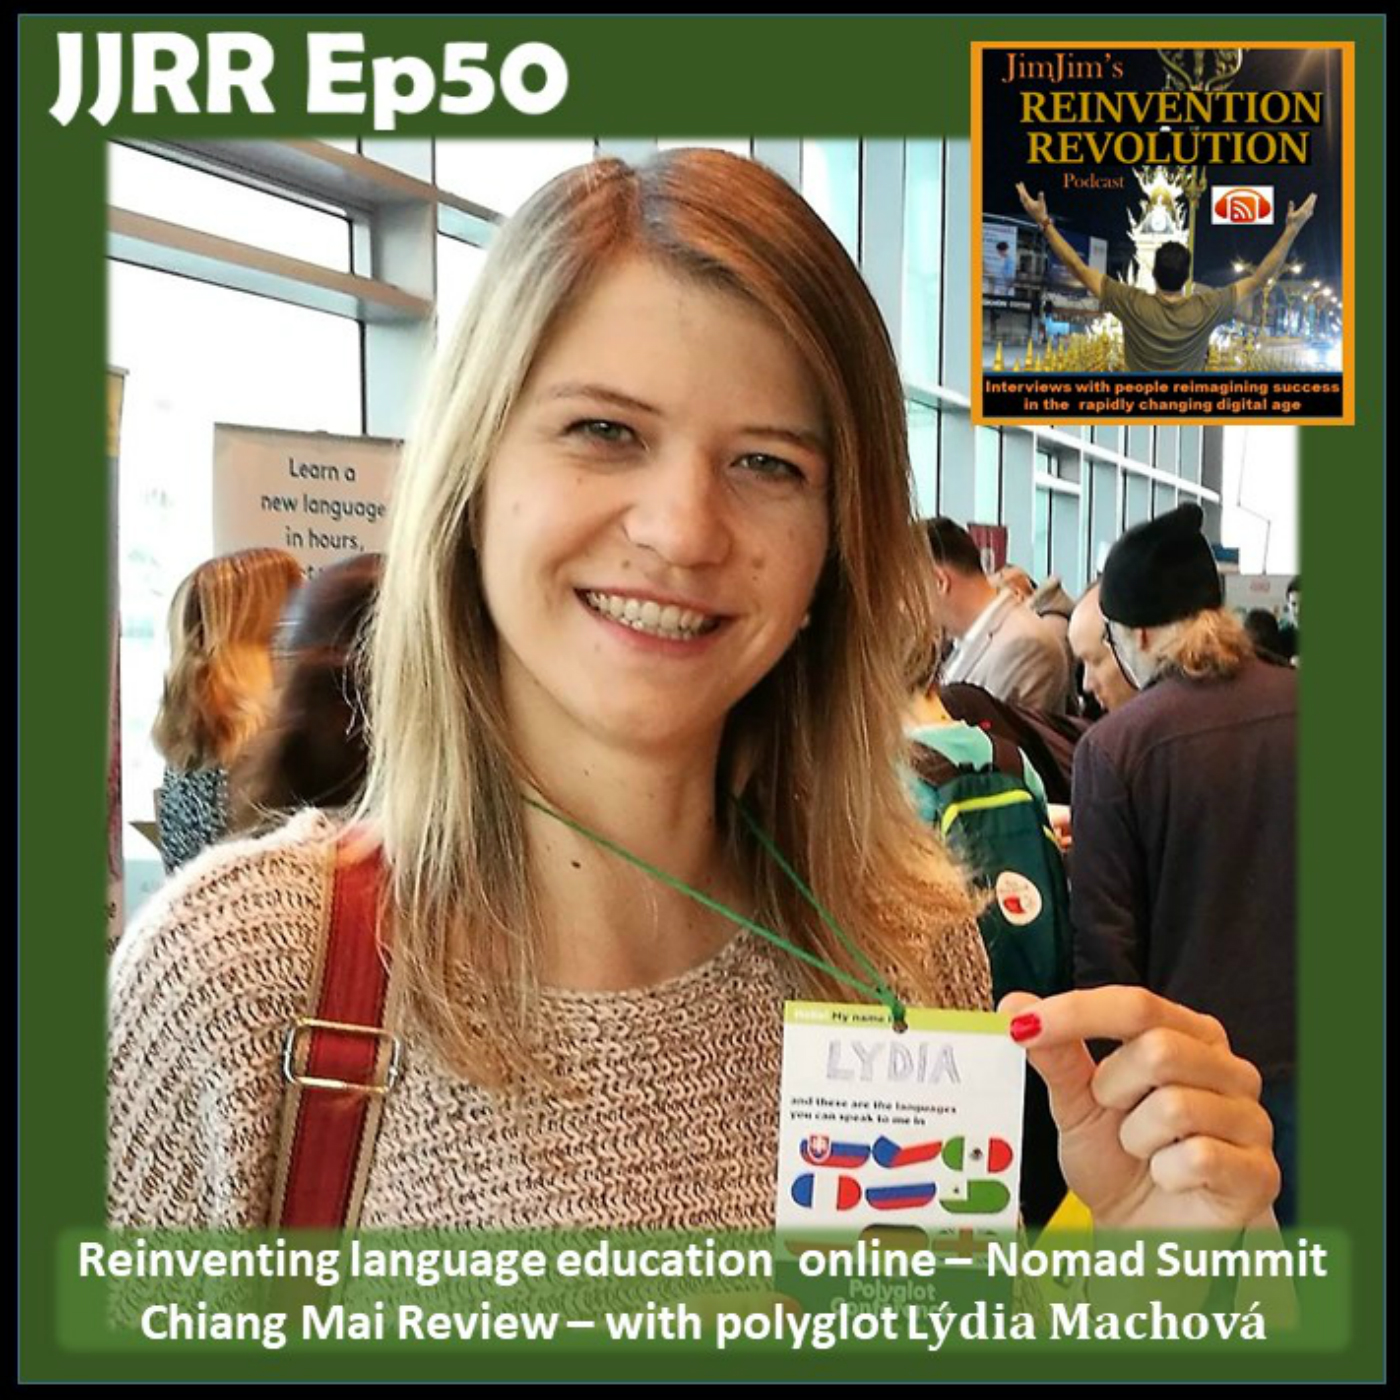 Read more about the article JJRR Ep50 Reinventing language education online – Nomad Summit Chiang Mai Review – with polyglot Ly ́dia Machova ́